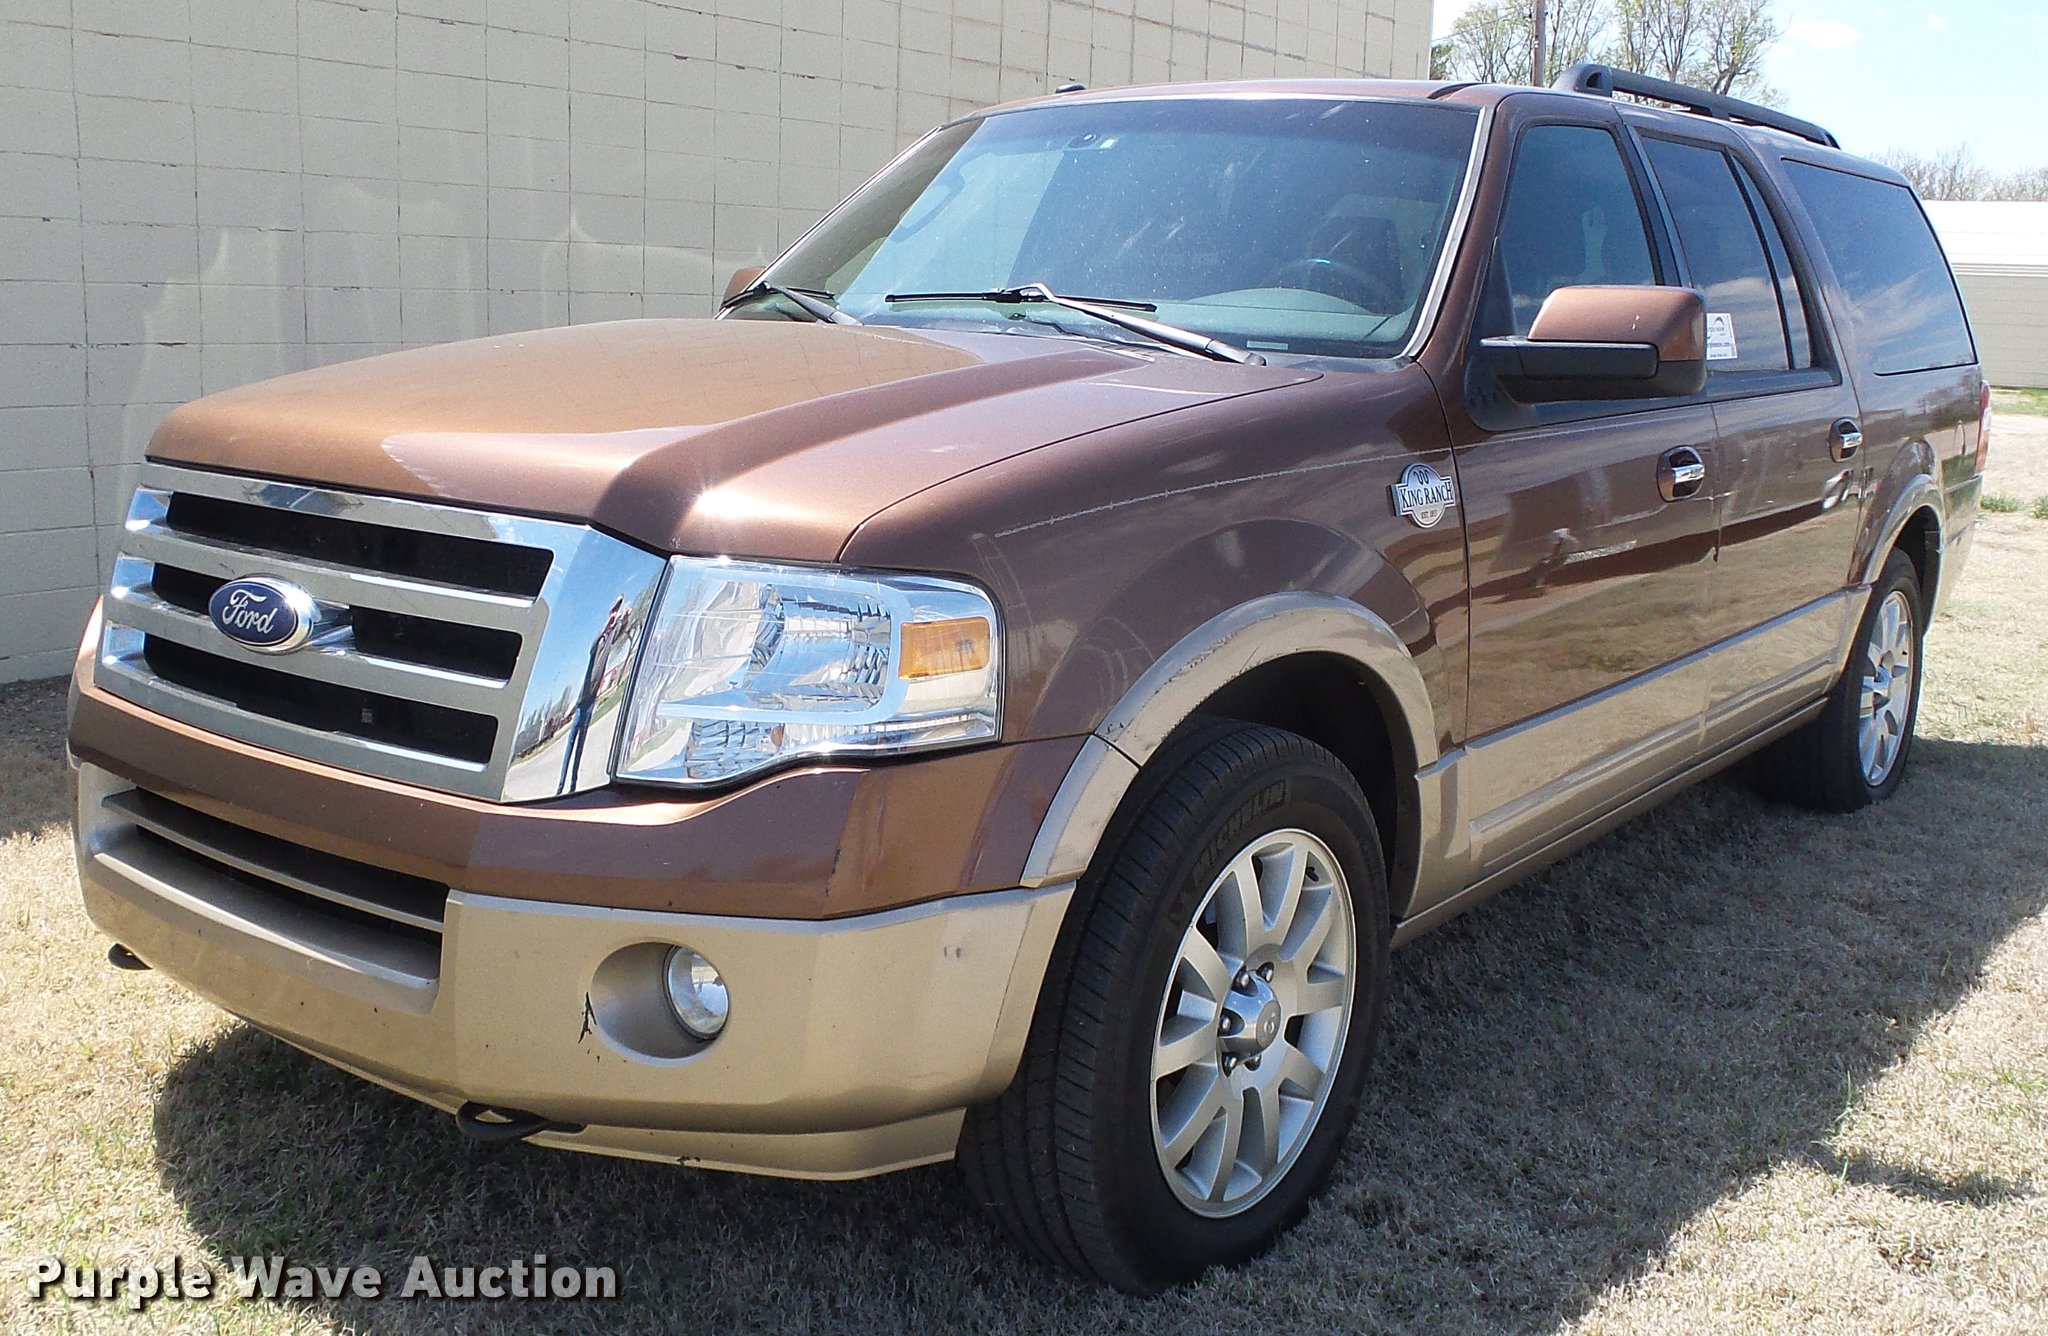 2011 Ford Expedition EL King Ranch SUV in Dighton, KS | Item DC5220 sold |  Purple Wave